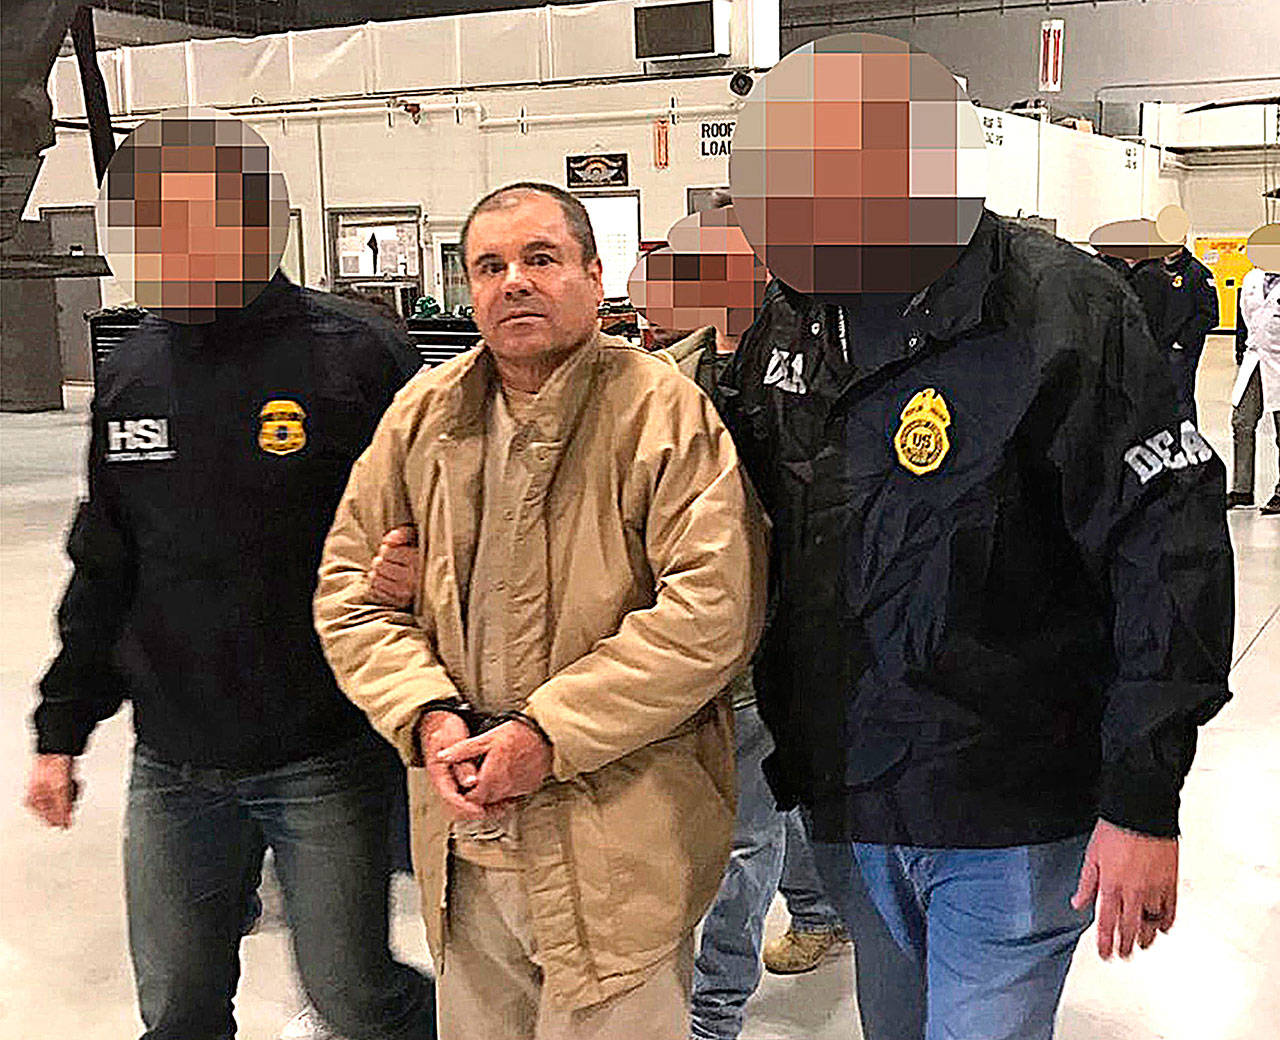 Drug lord Joaquin Guzman Loera, alias ‘El Chapo,’ as he is extradited to the United States on Jan. 19, 2017, and flown from a jail in Ciudad Juarez, Mexico, to Long Island MacArthur Airport in Islip, N.Y., to face charges. He was found guilty Tuesday by an anonymous jury in a unanimous verdict. (PGR/Prensa Internacional)